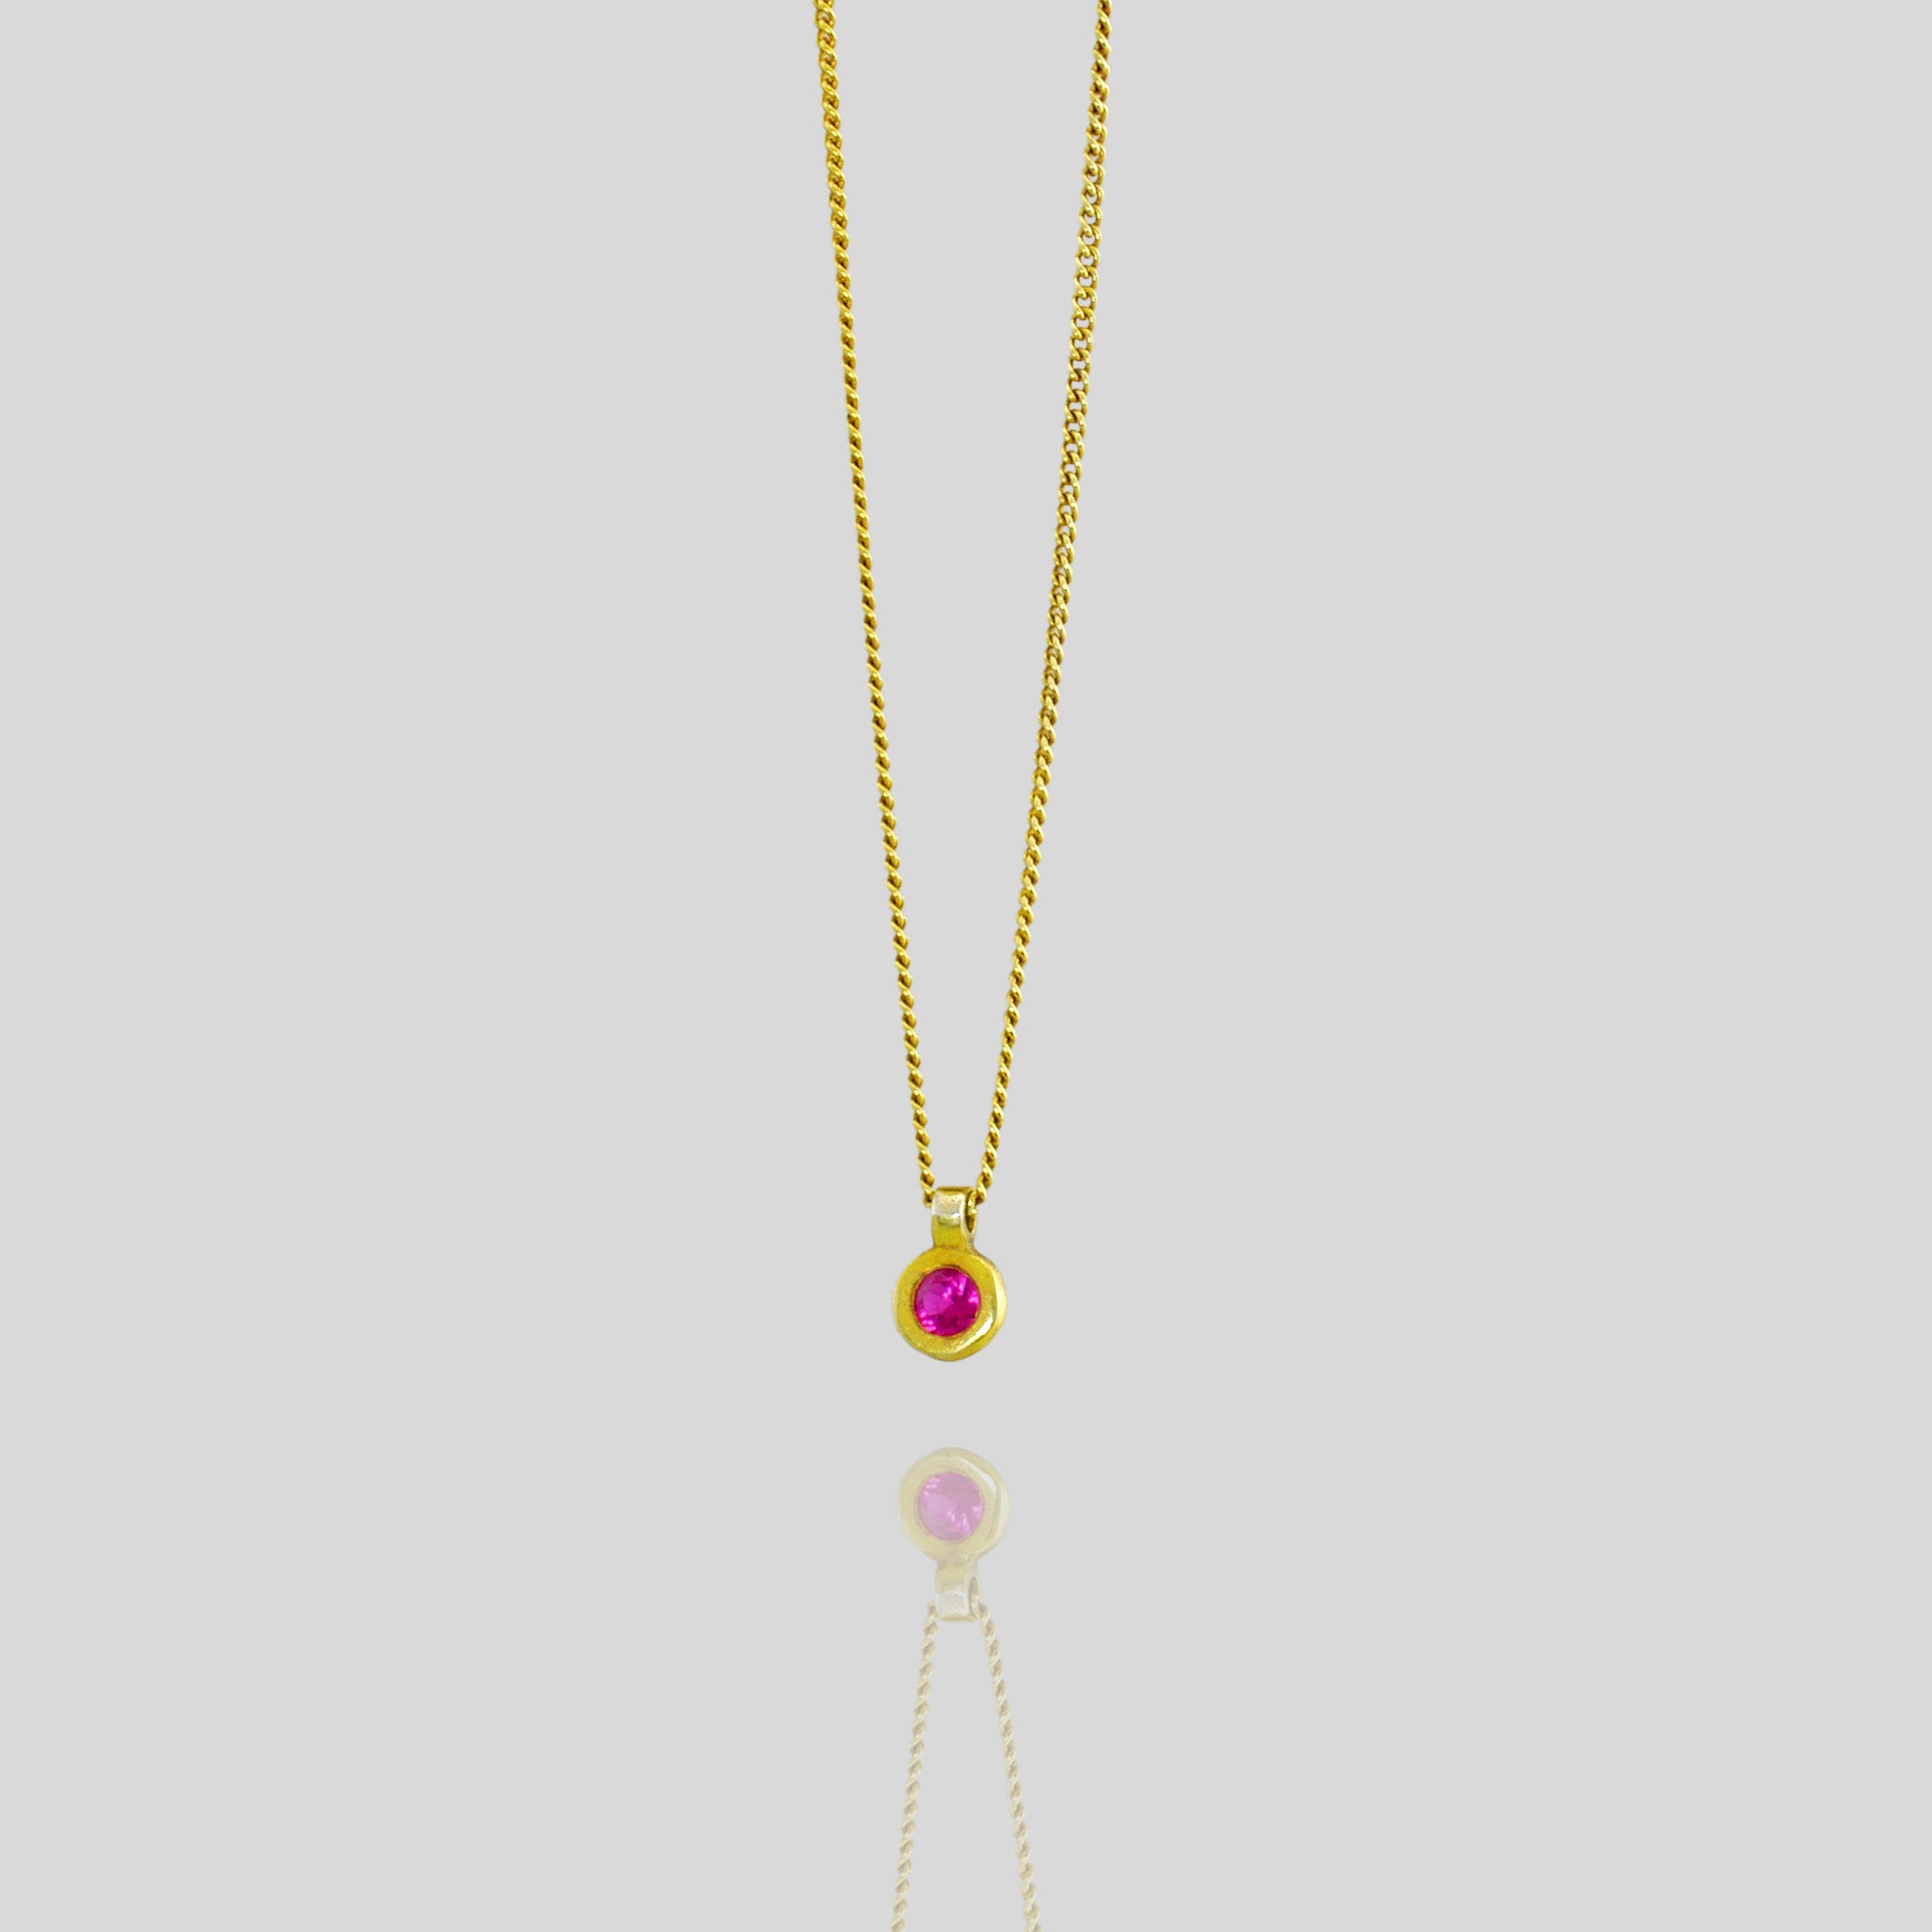 Classic round 18k Gold pendant with vibrant red ruby, symbolizing July birthstone and associated with love, passion, and prosperity.